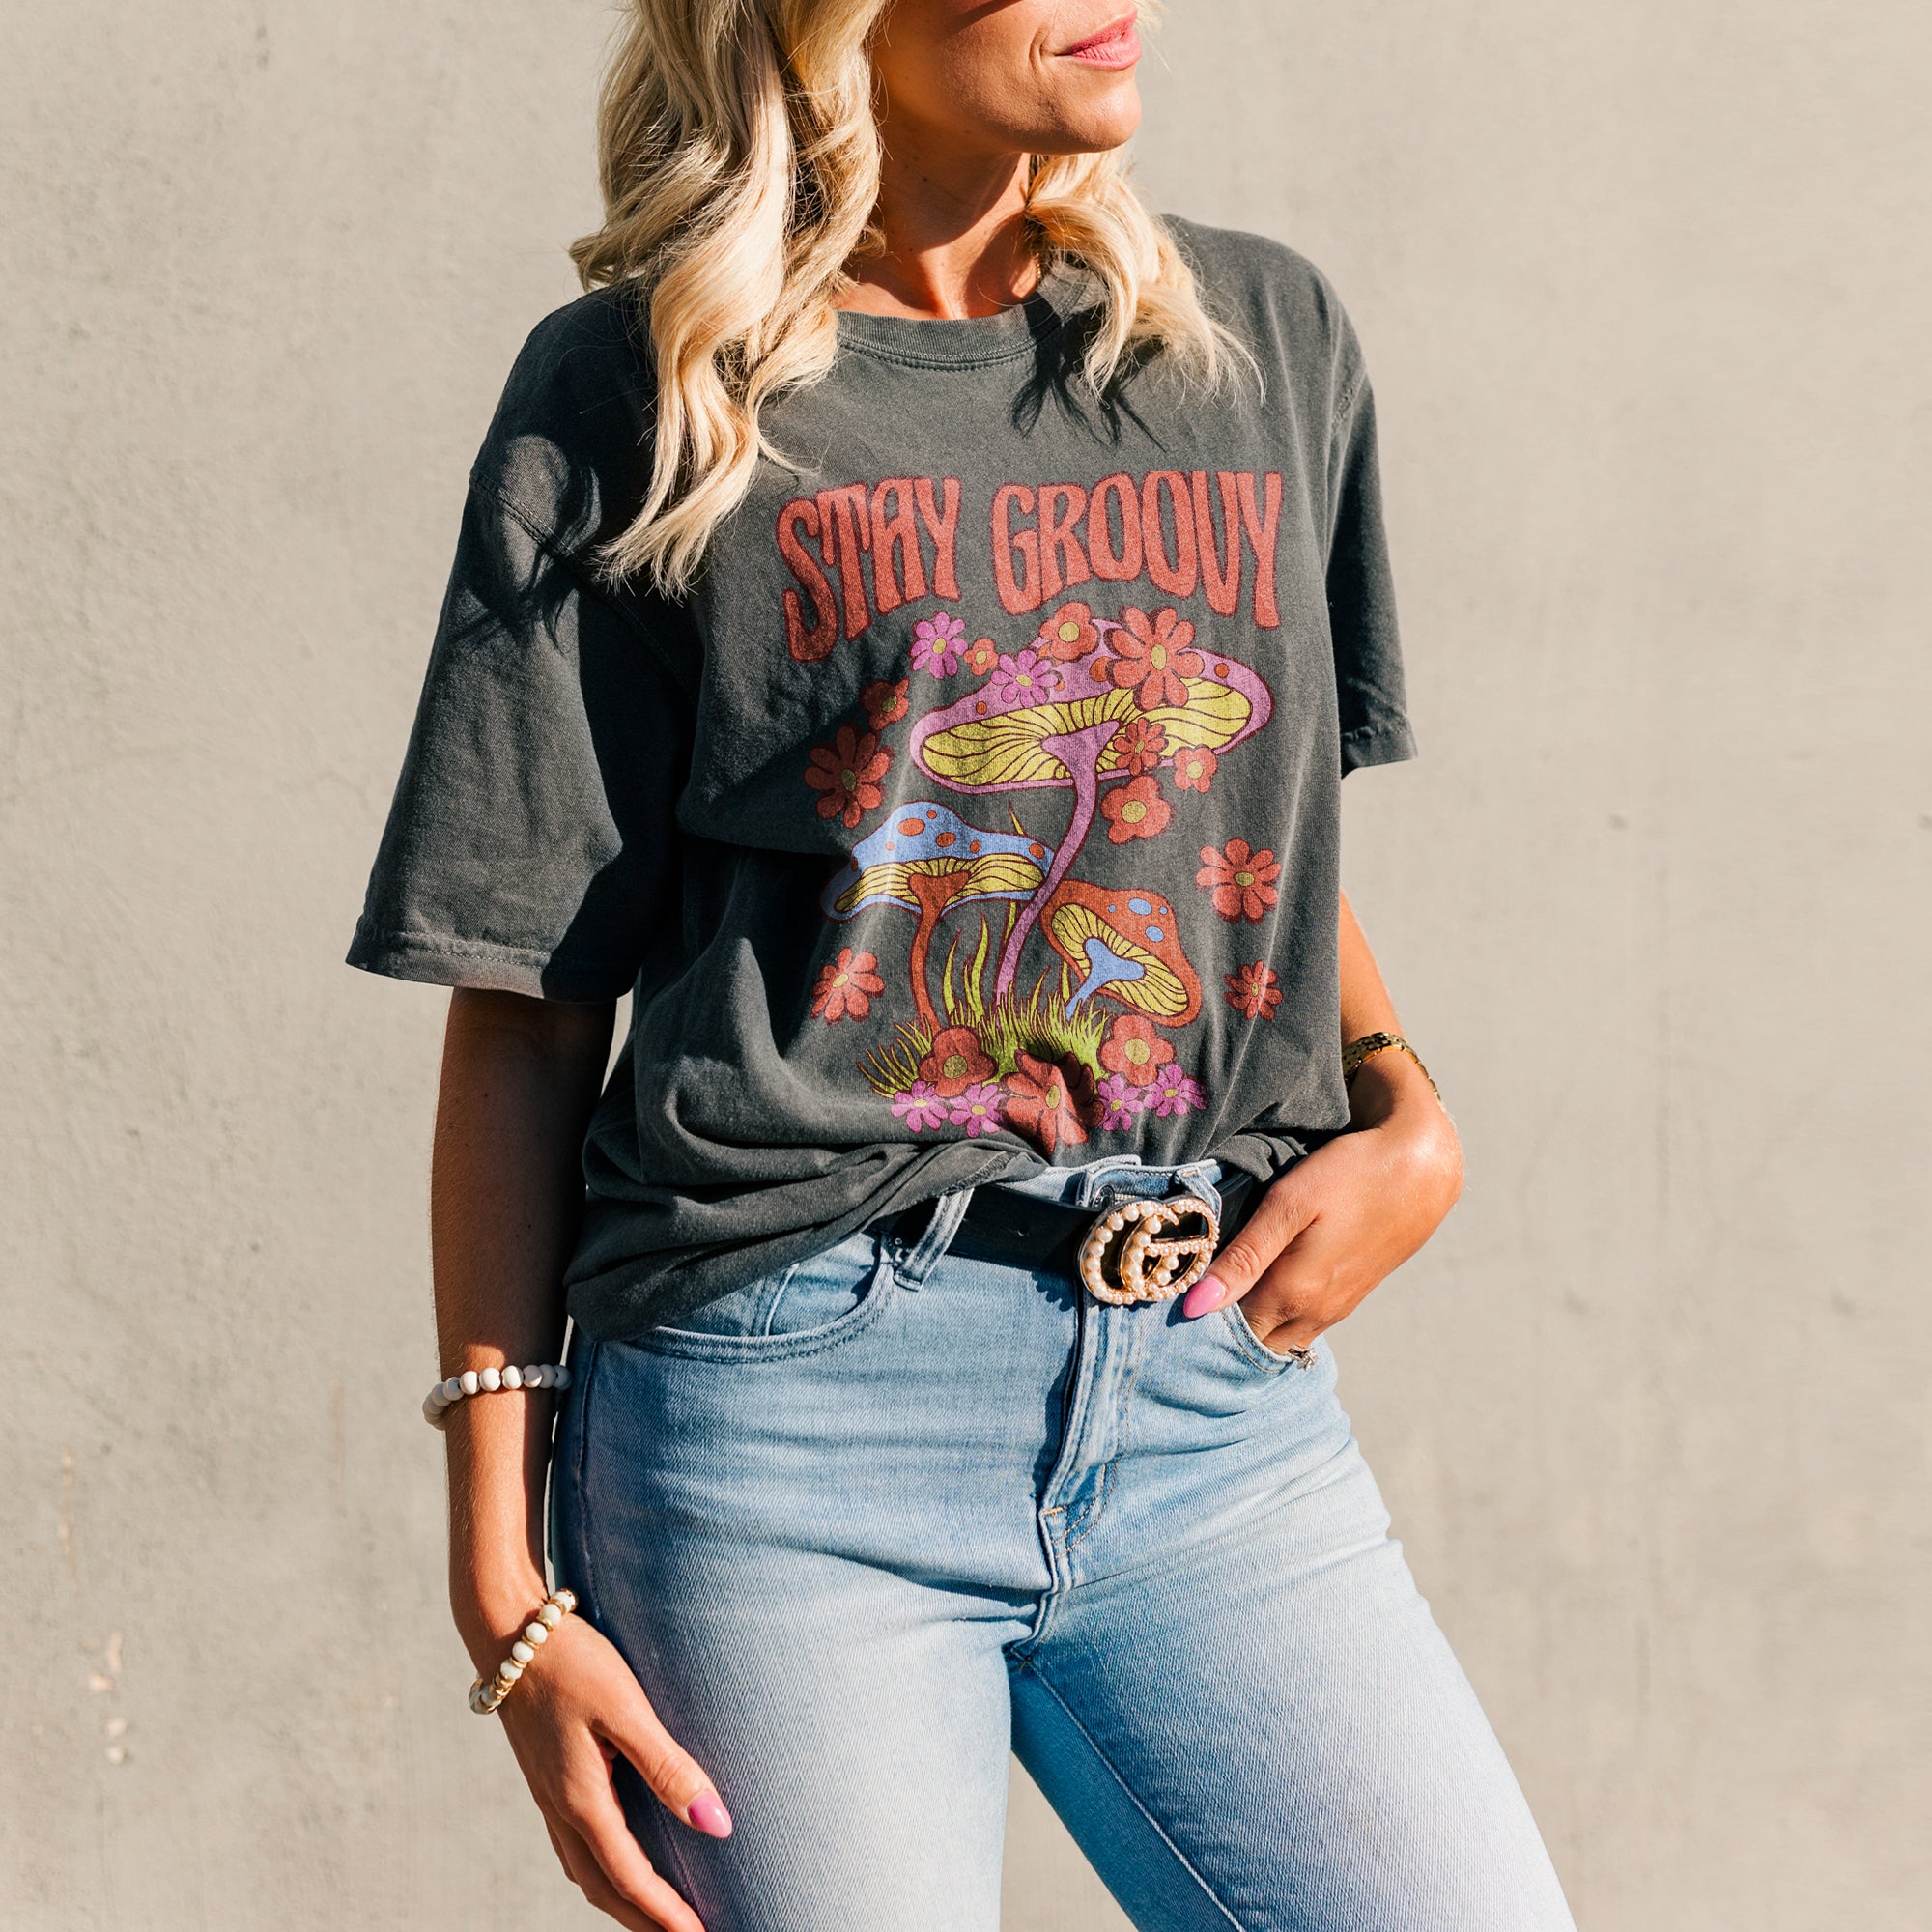 Stay Groovy Oversized Shirt Garment-Dyed Graphic Tee